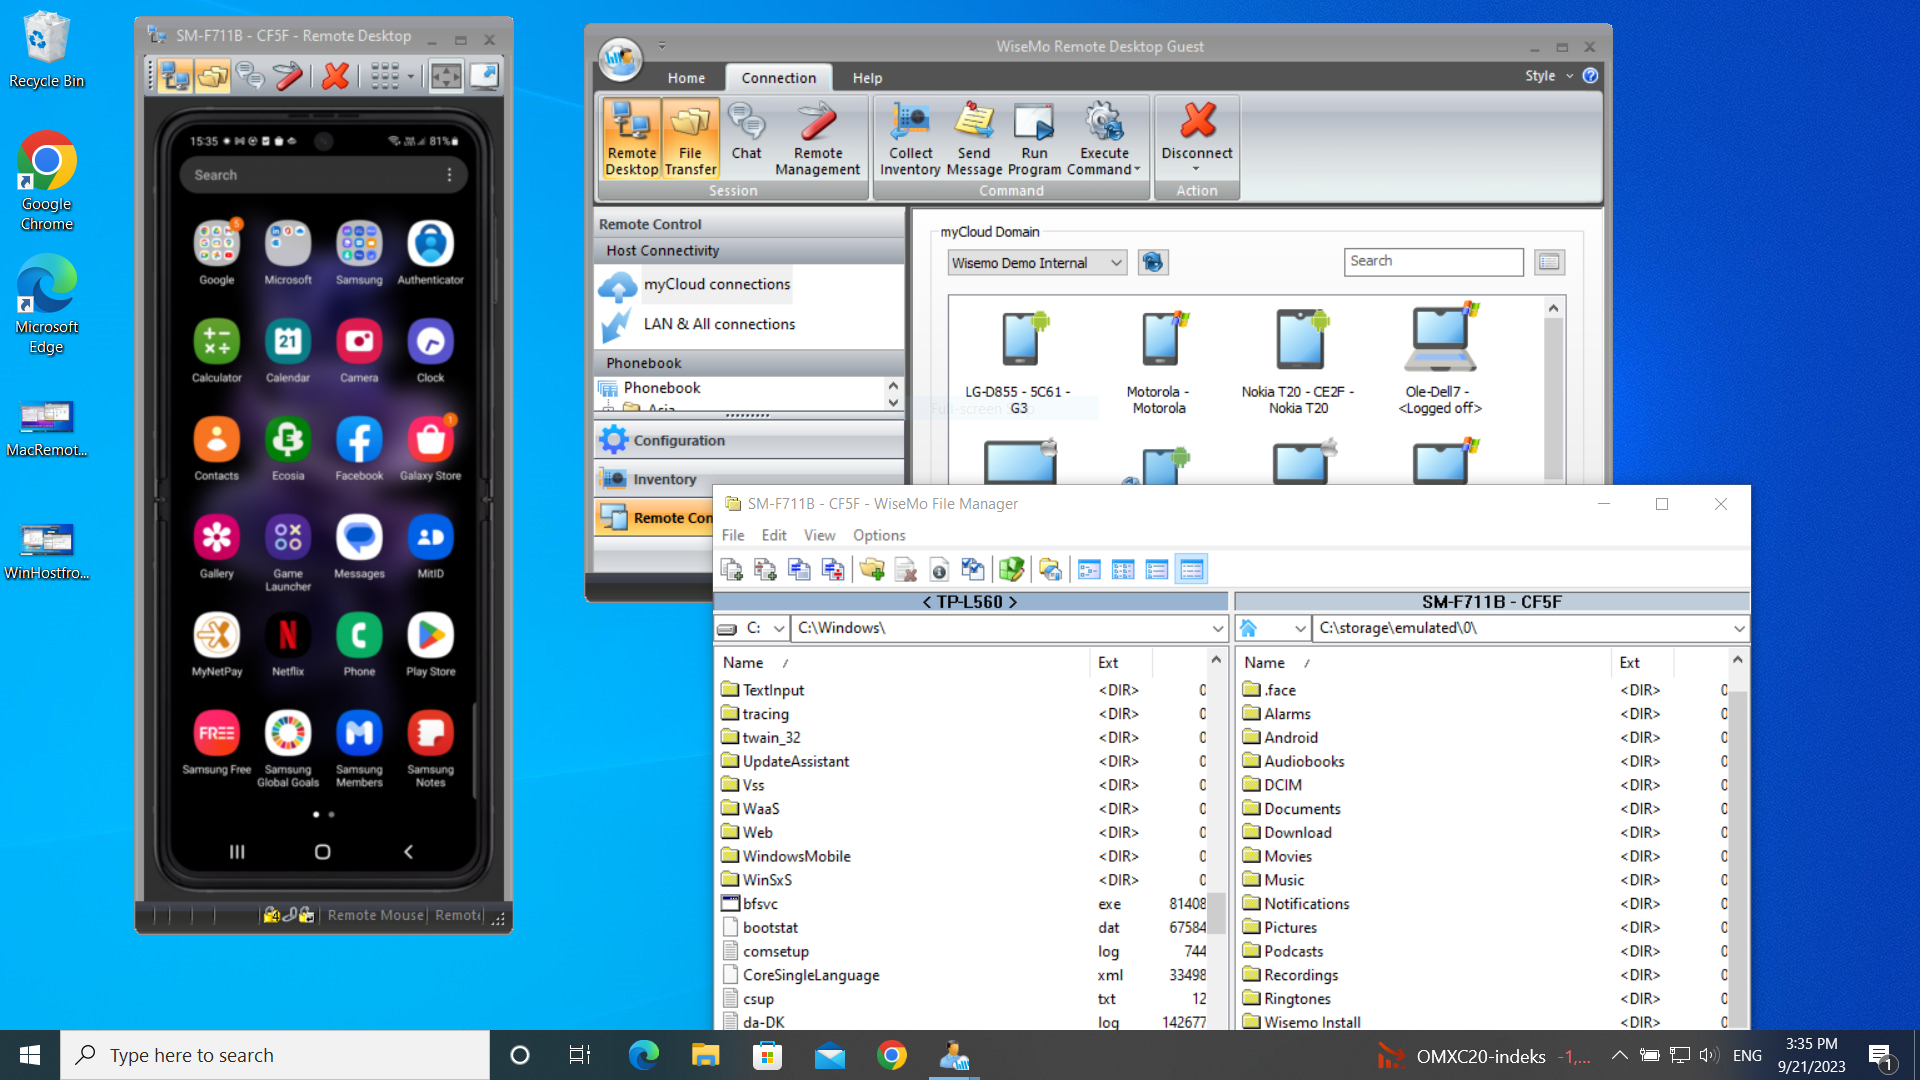 Windows to Android file transfer and remote control